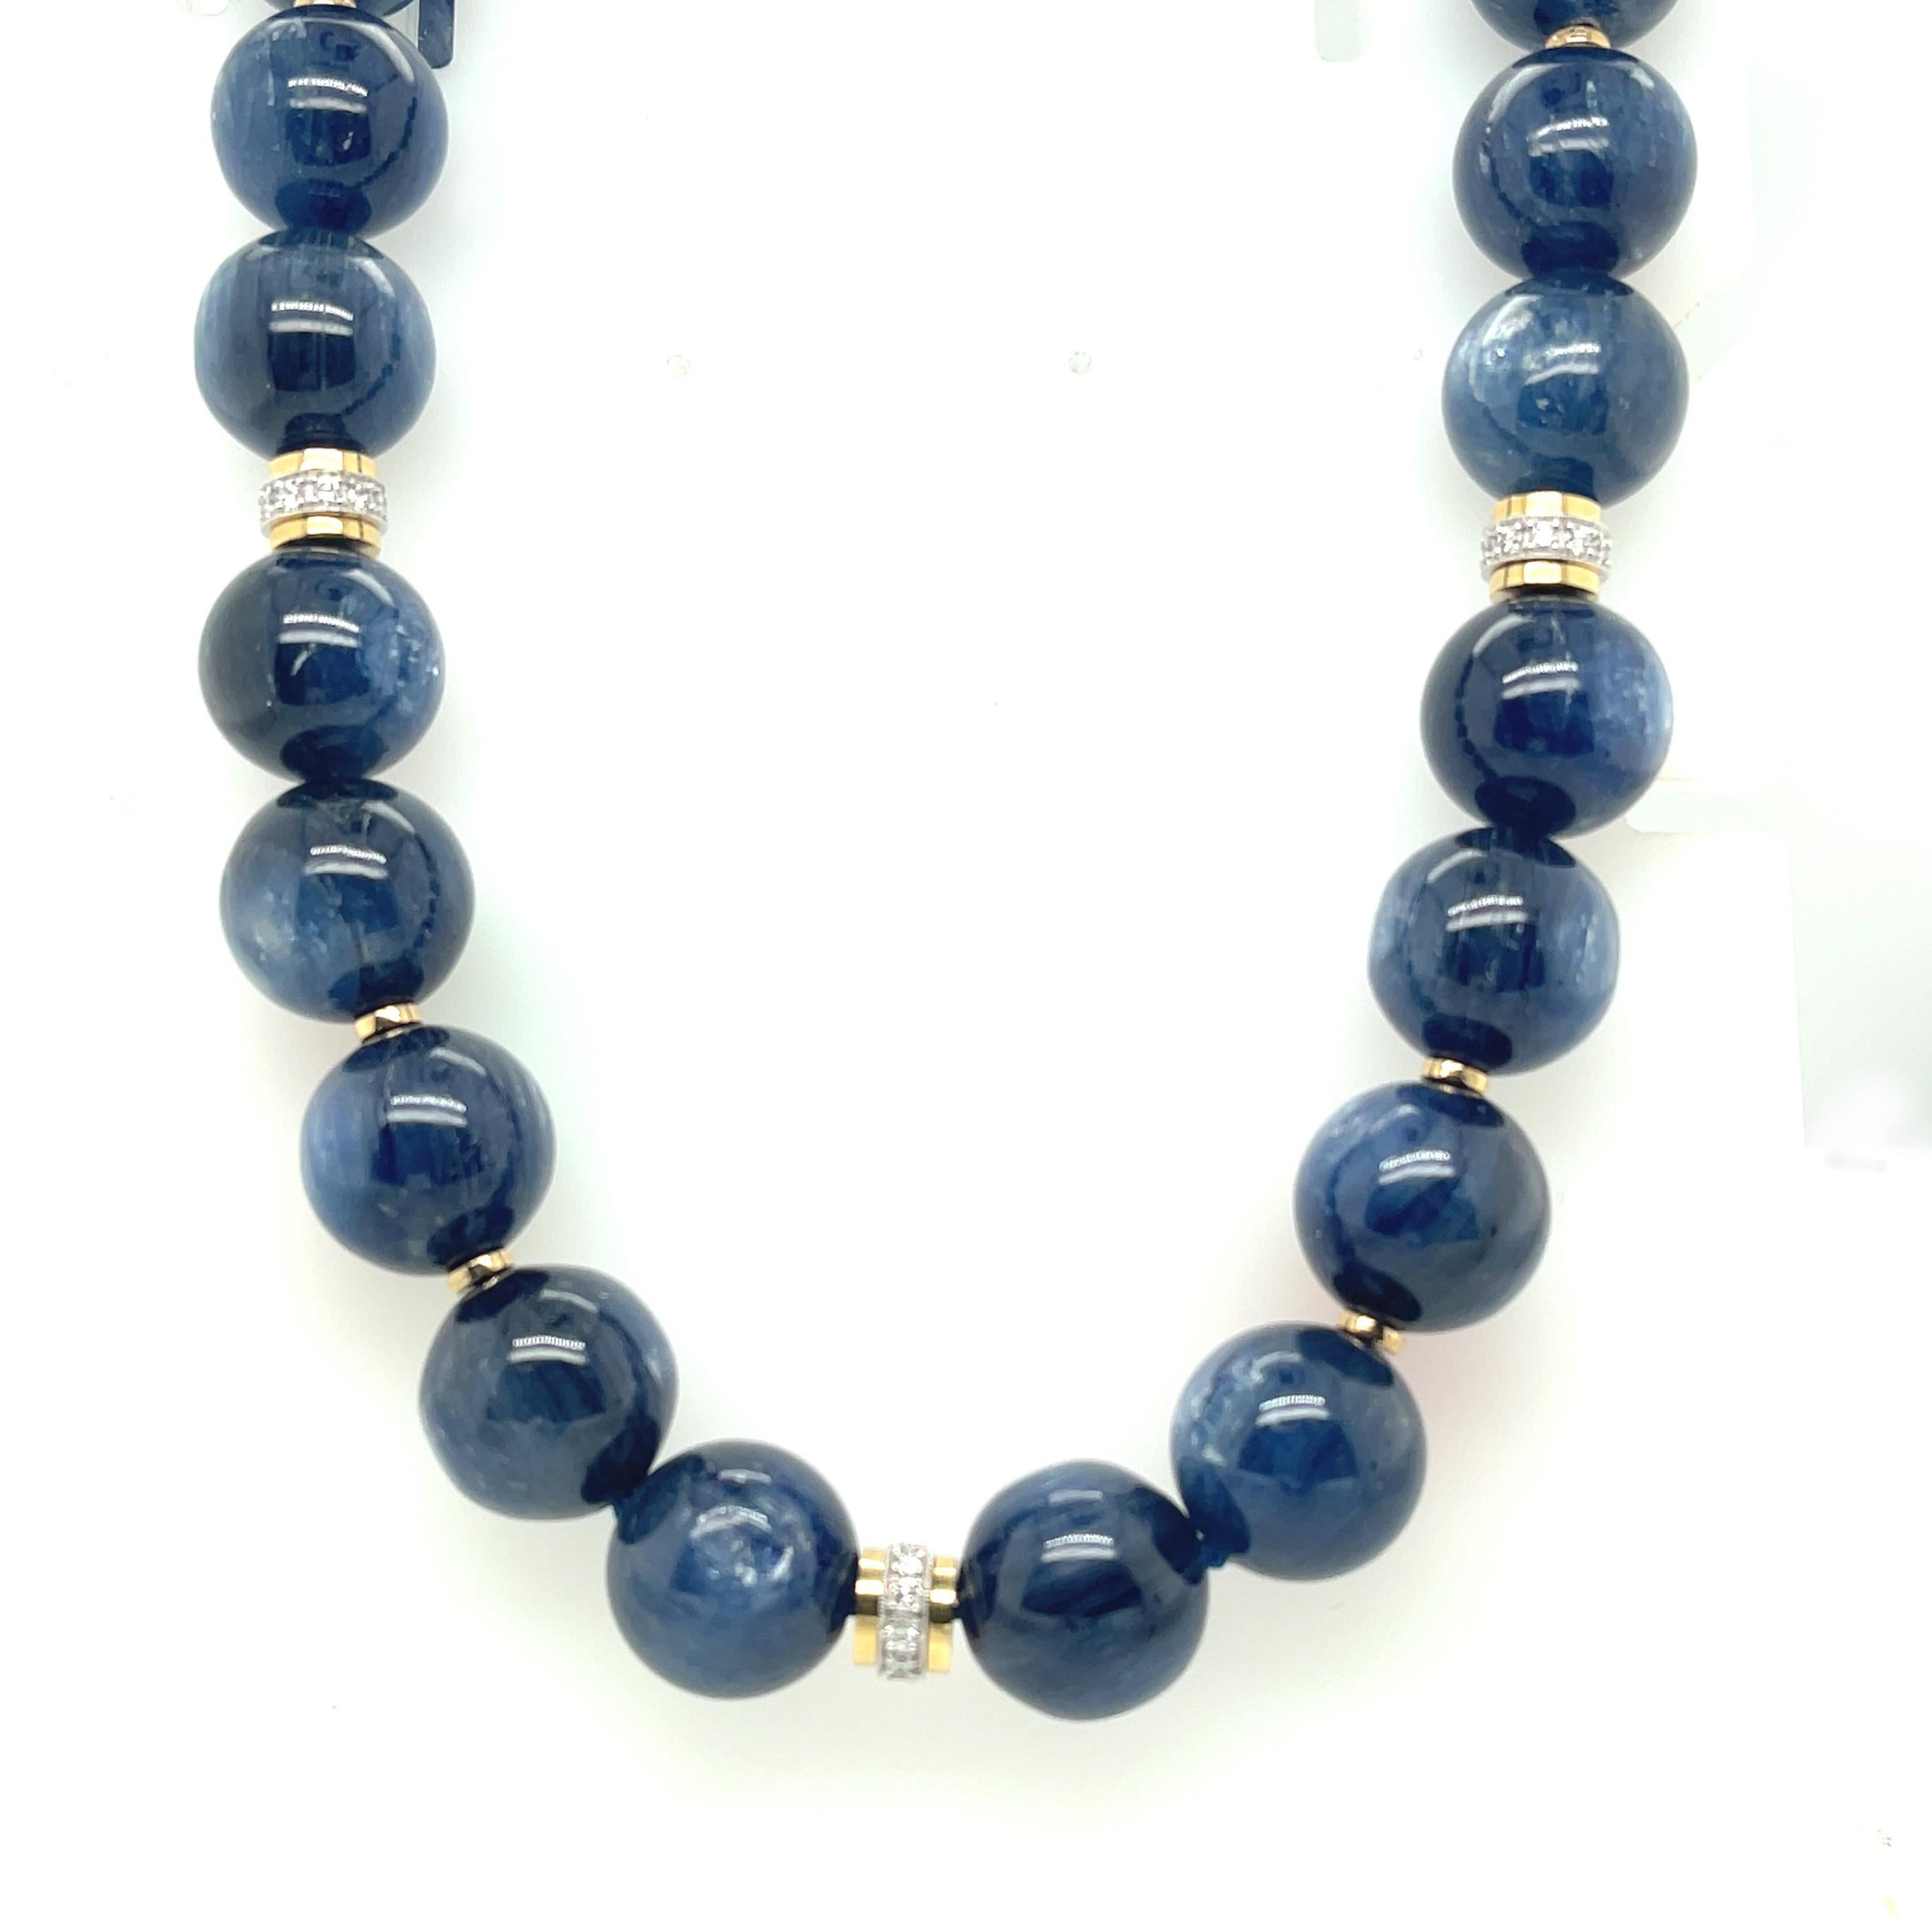 This blue kyanite gemstone beaded necklace is breathtakingly luminescent with its gorgeous silvery white sheen and luxurious satin-like appearance! The 14mm kyanite beads display varying shades of rich, medium blue and have been hand-strung and